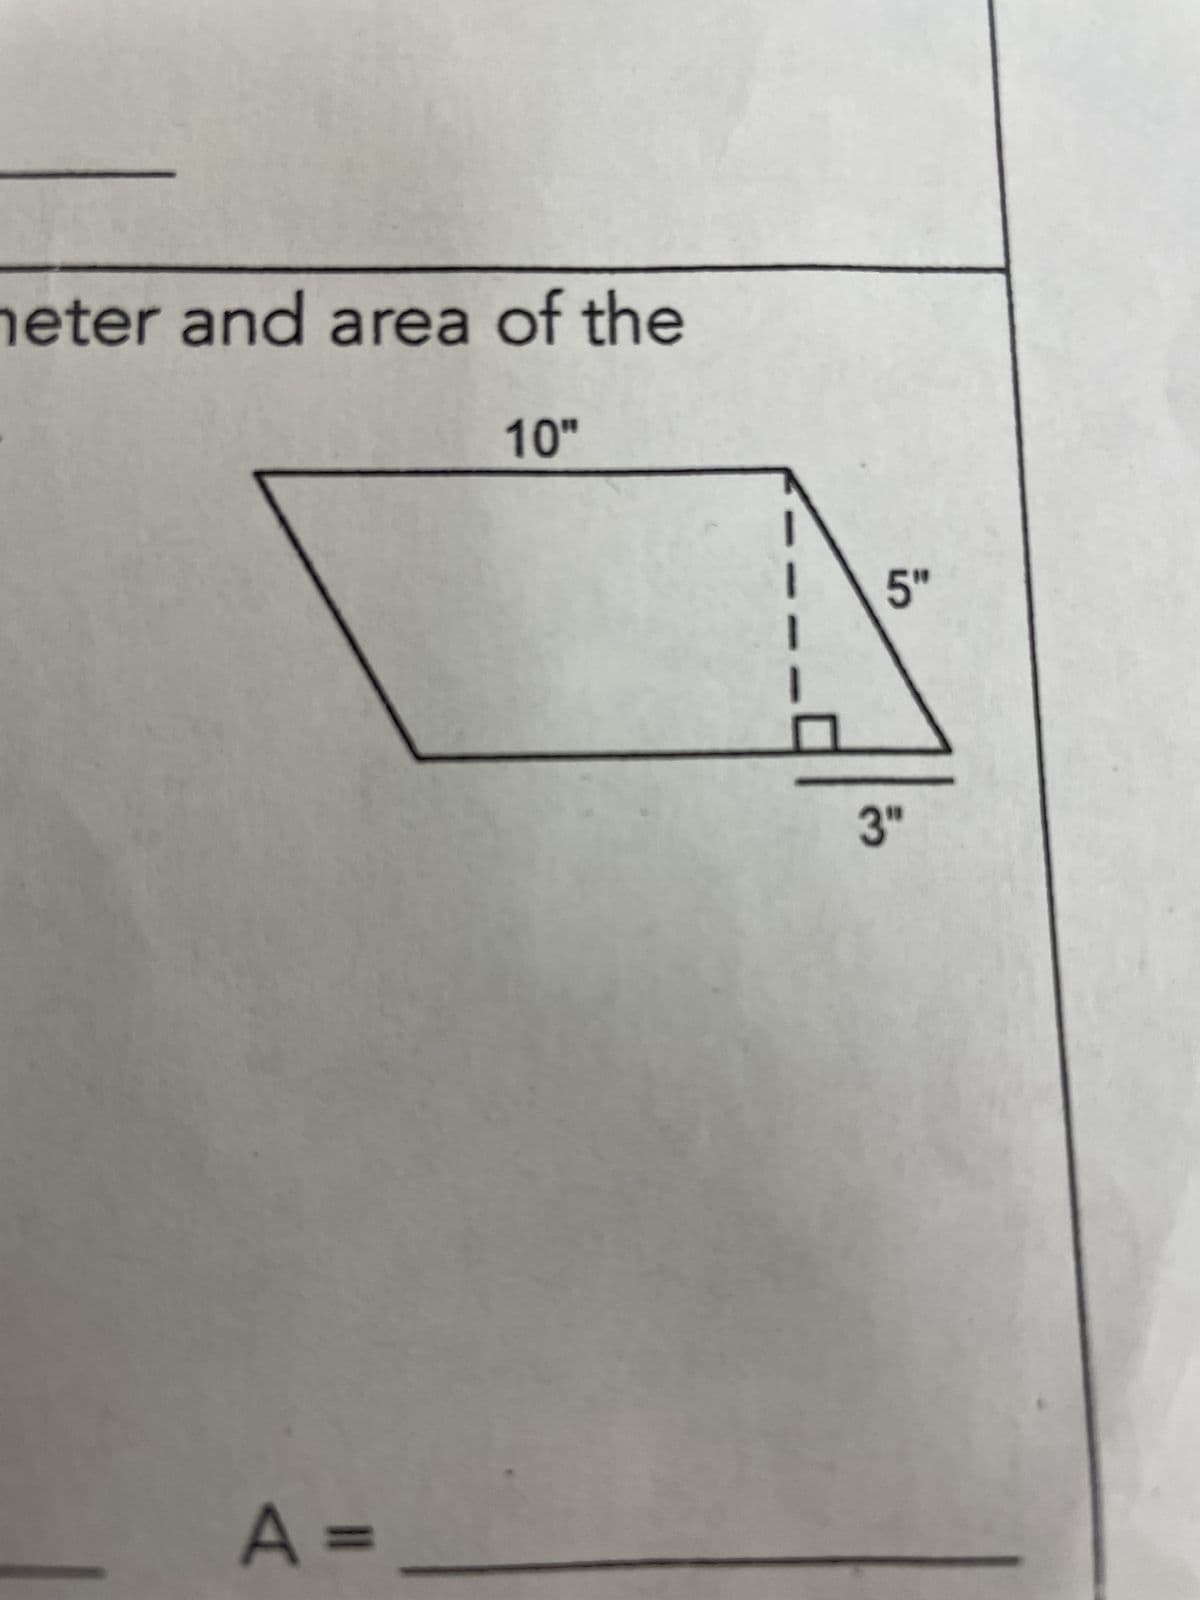 heter and area of the
A =
10"
5"
3"